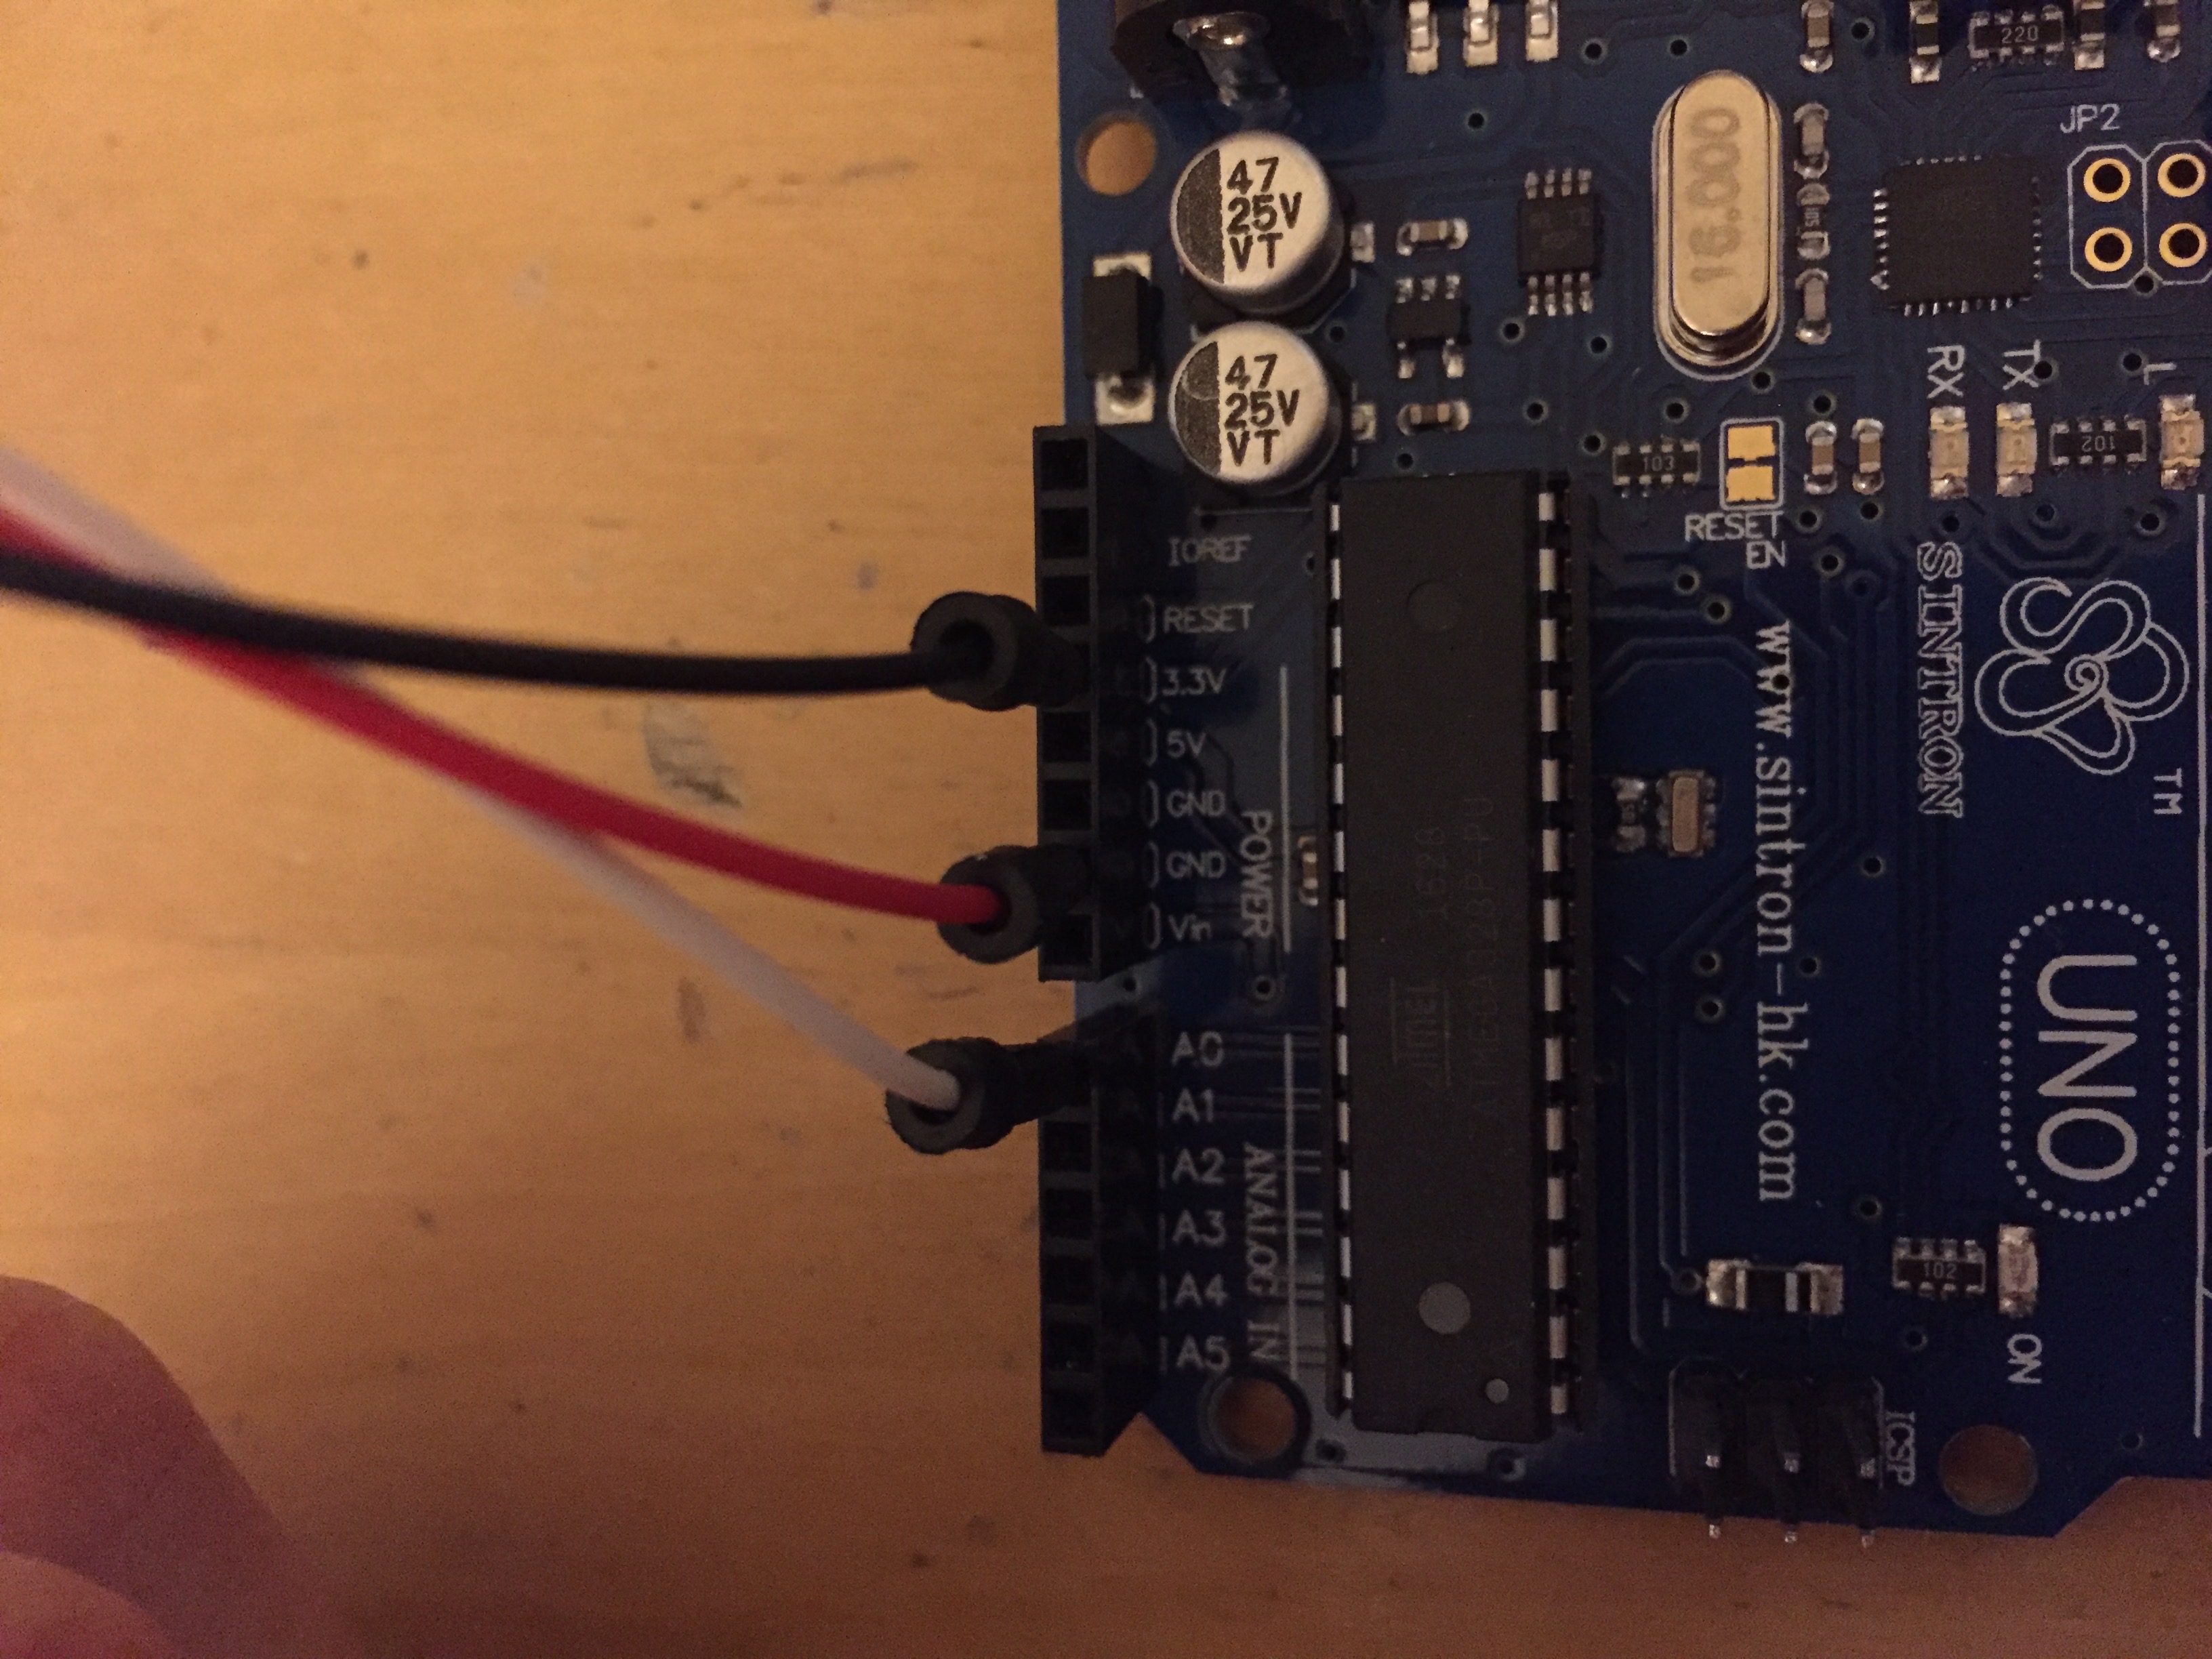 Connecting up an Arduino to a moisture meter for an analogue signal reading